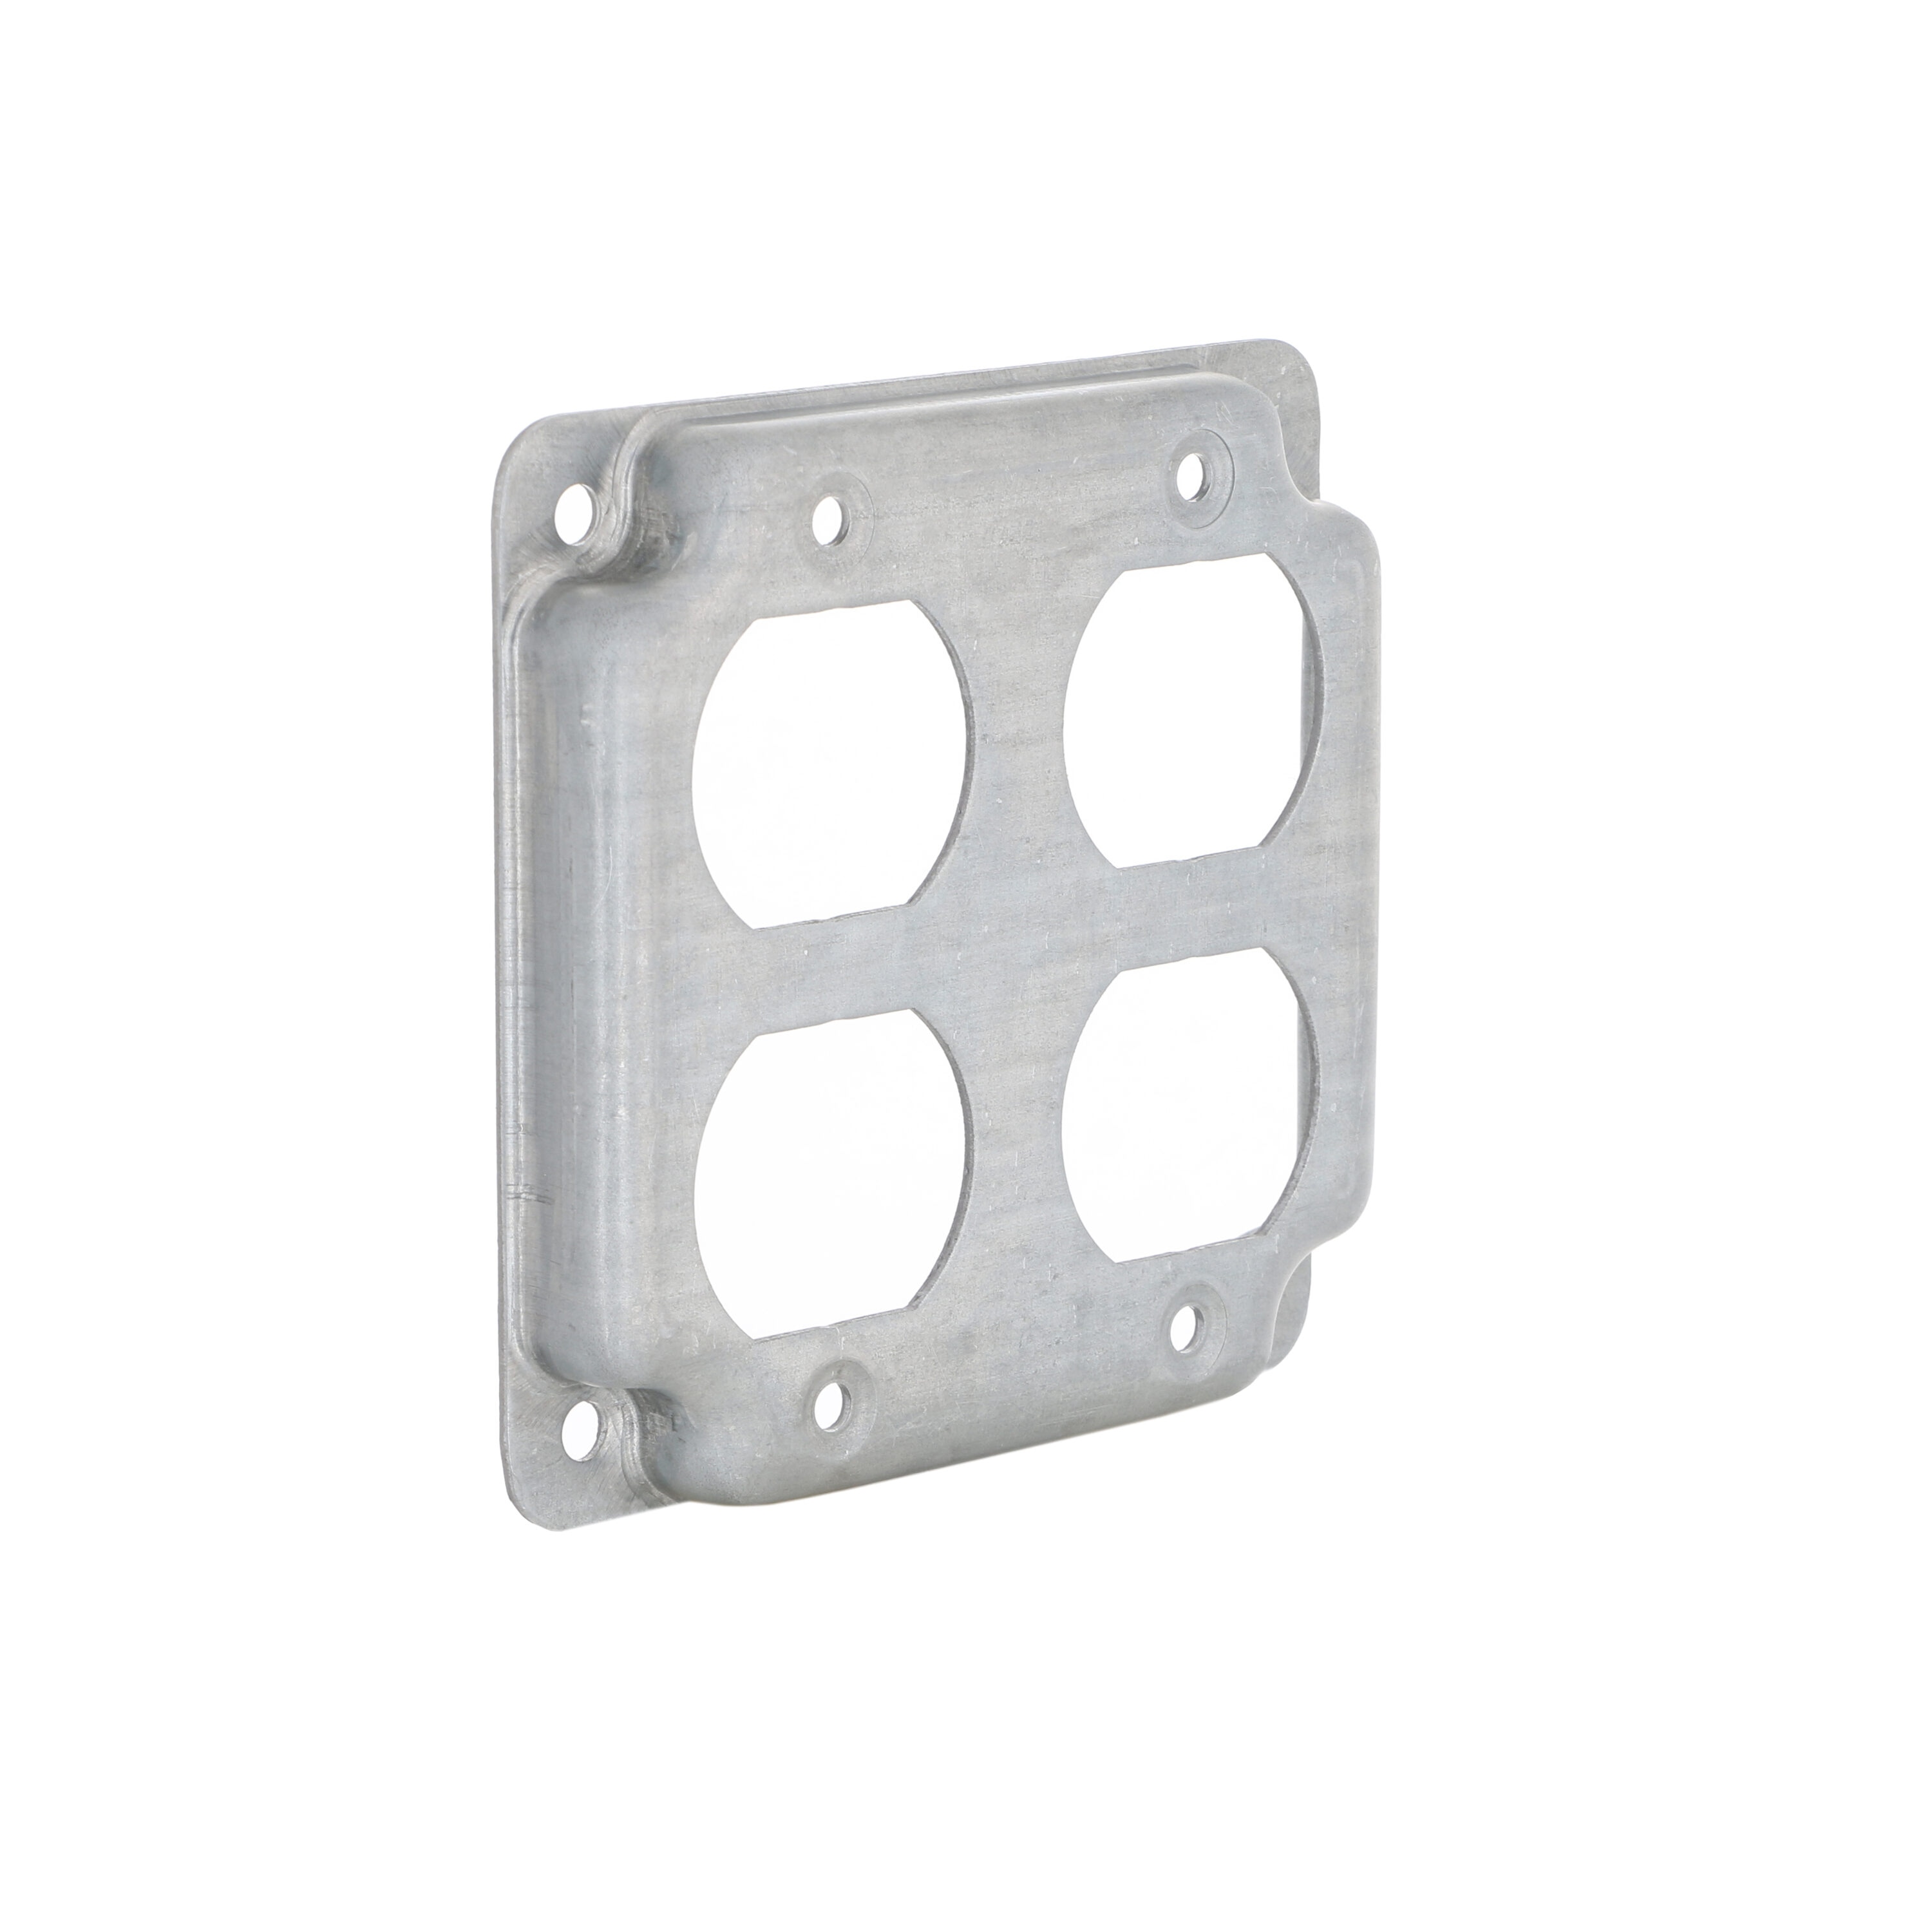 RACO 2-Gang Square Electrical Box Cover, Metal